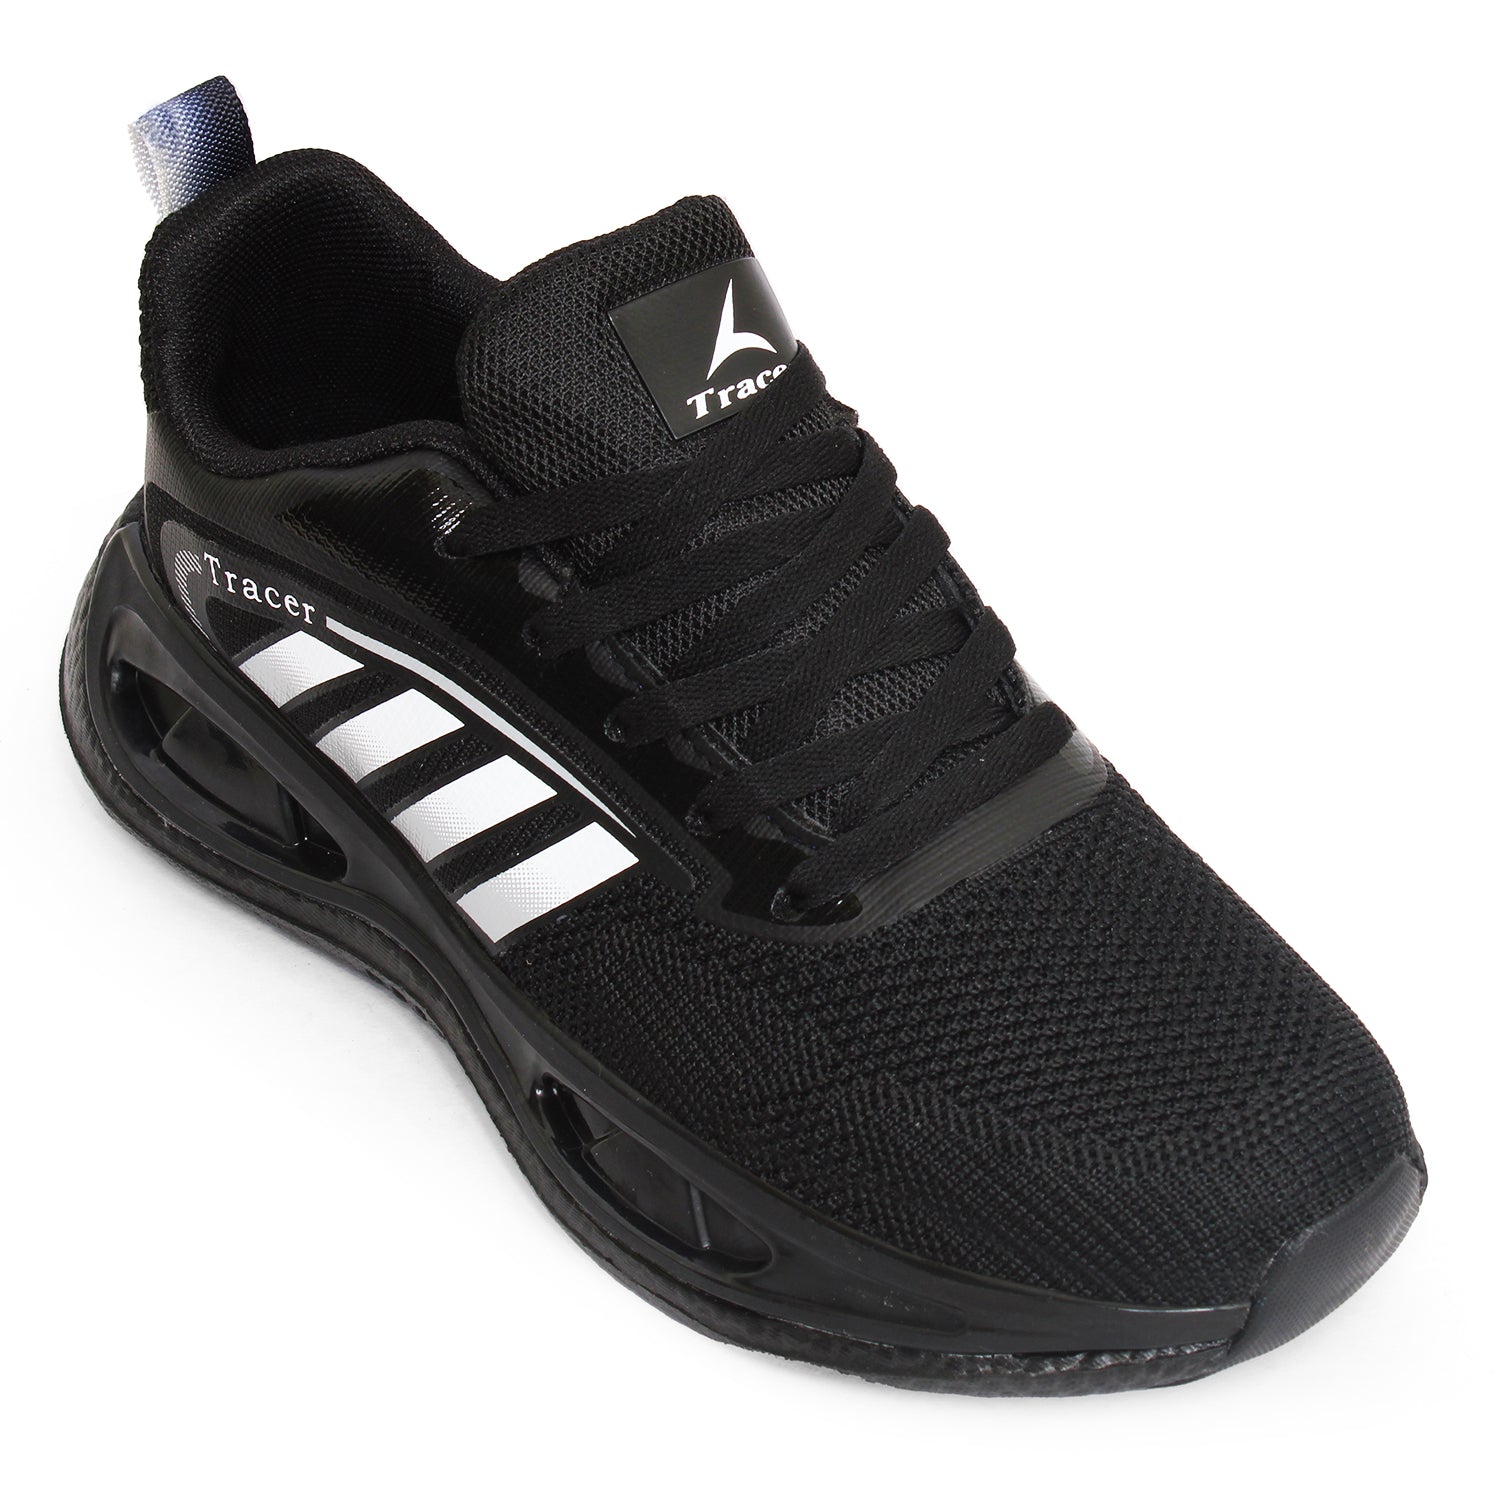 Tracer India Conquer 2620 Sneaker Black